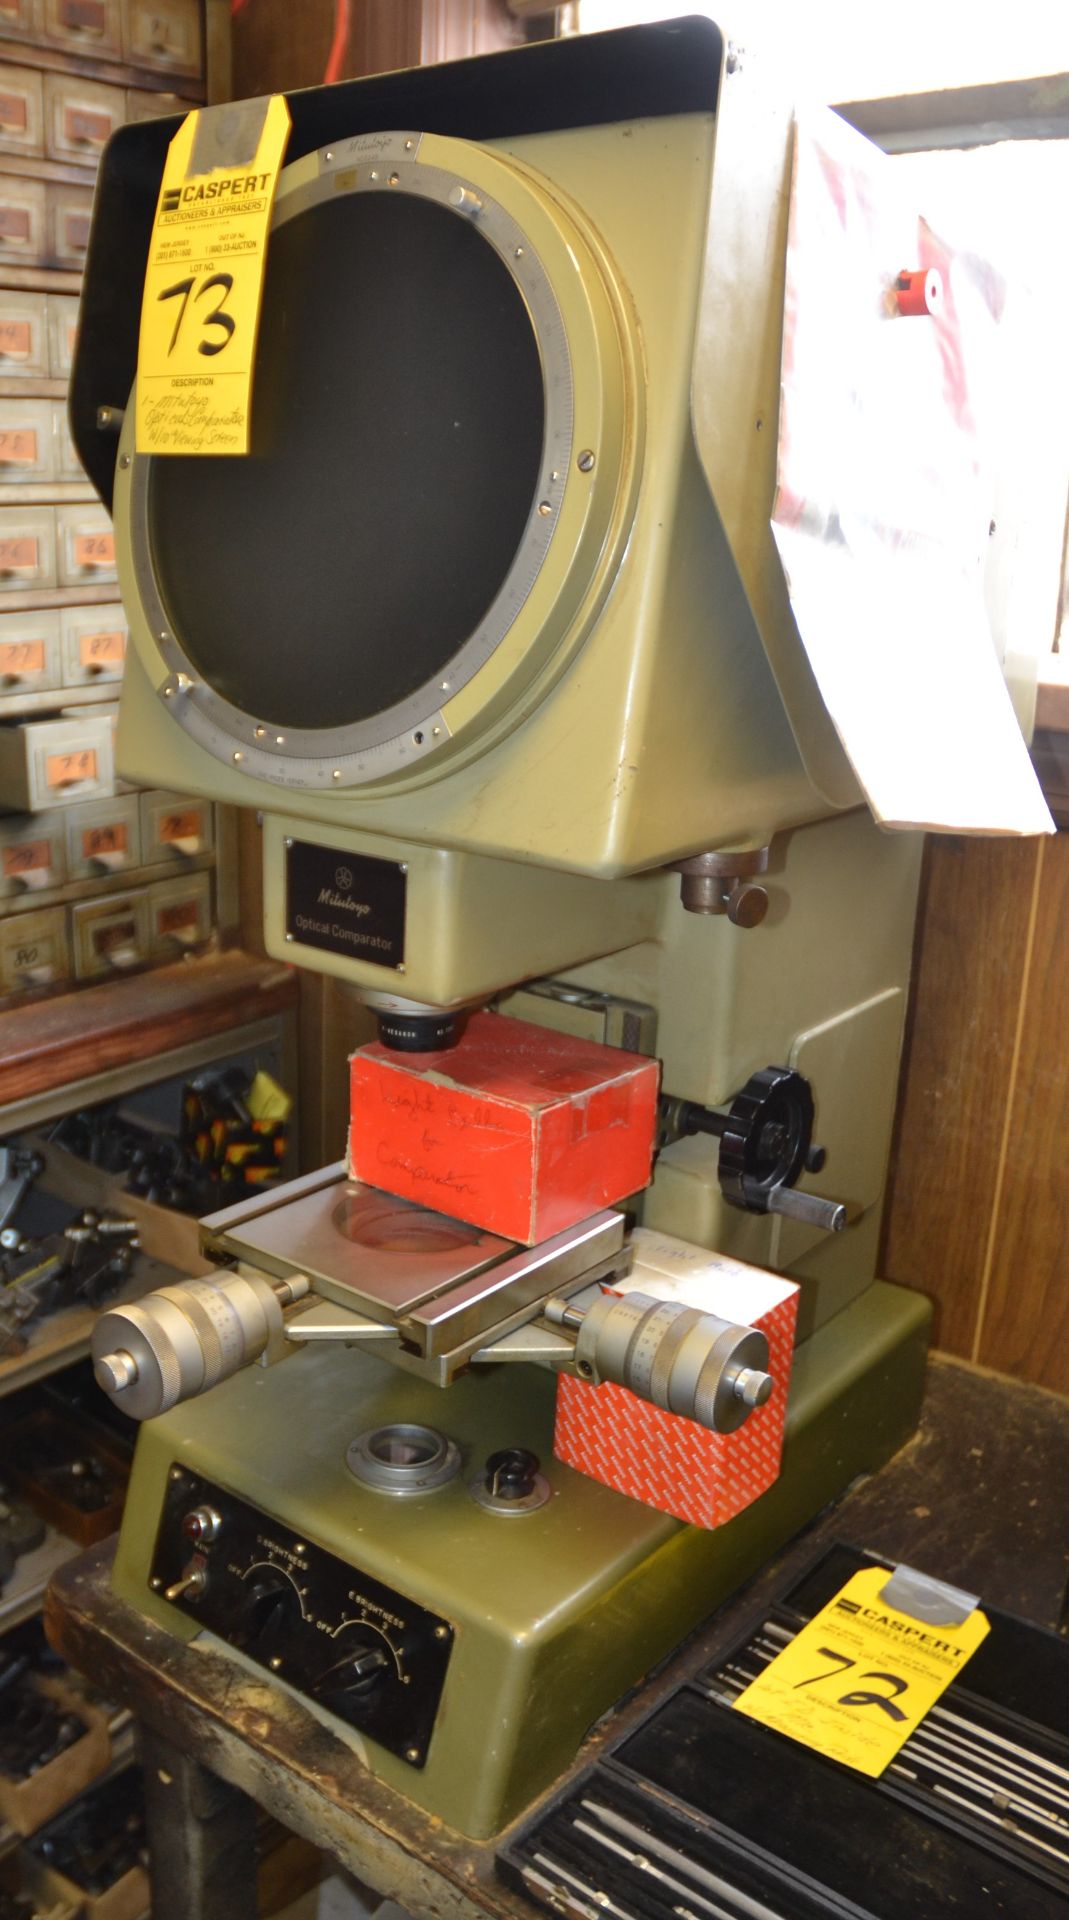 Mitutoyo Optical Comparator with 10" Viewing Screen